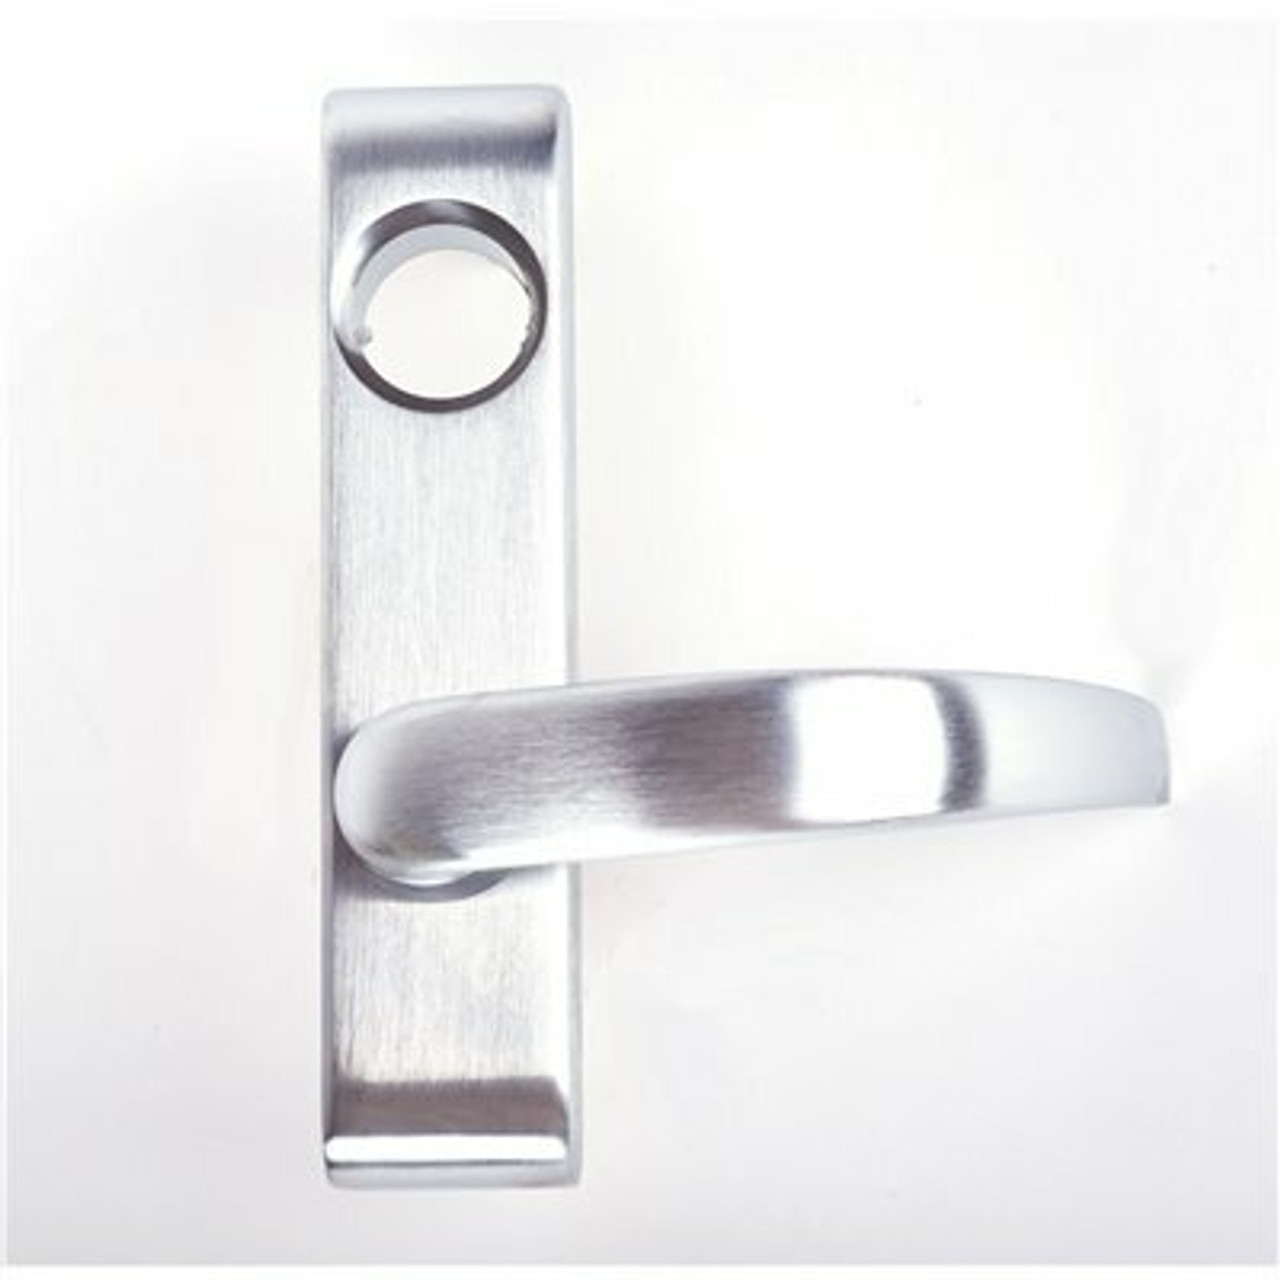 Von Duprin Grade-1 Satin Chrome Exit Device Trim Only, Classroom Function With 17 Lever, Left Hand Reverse - 310013254